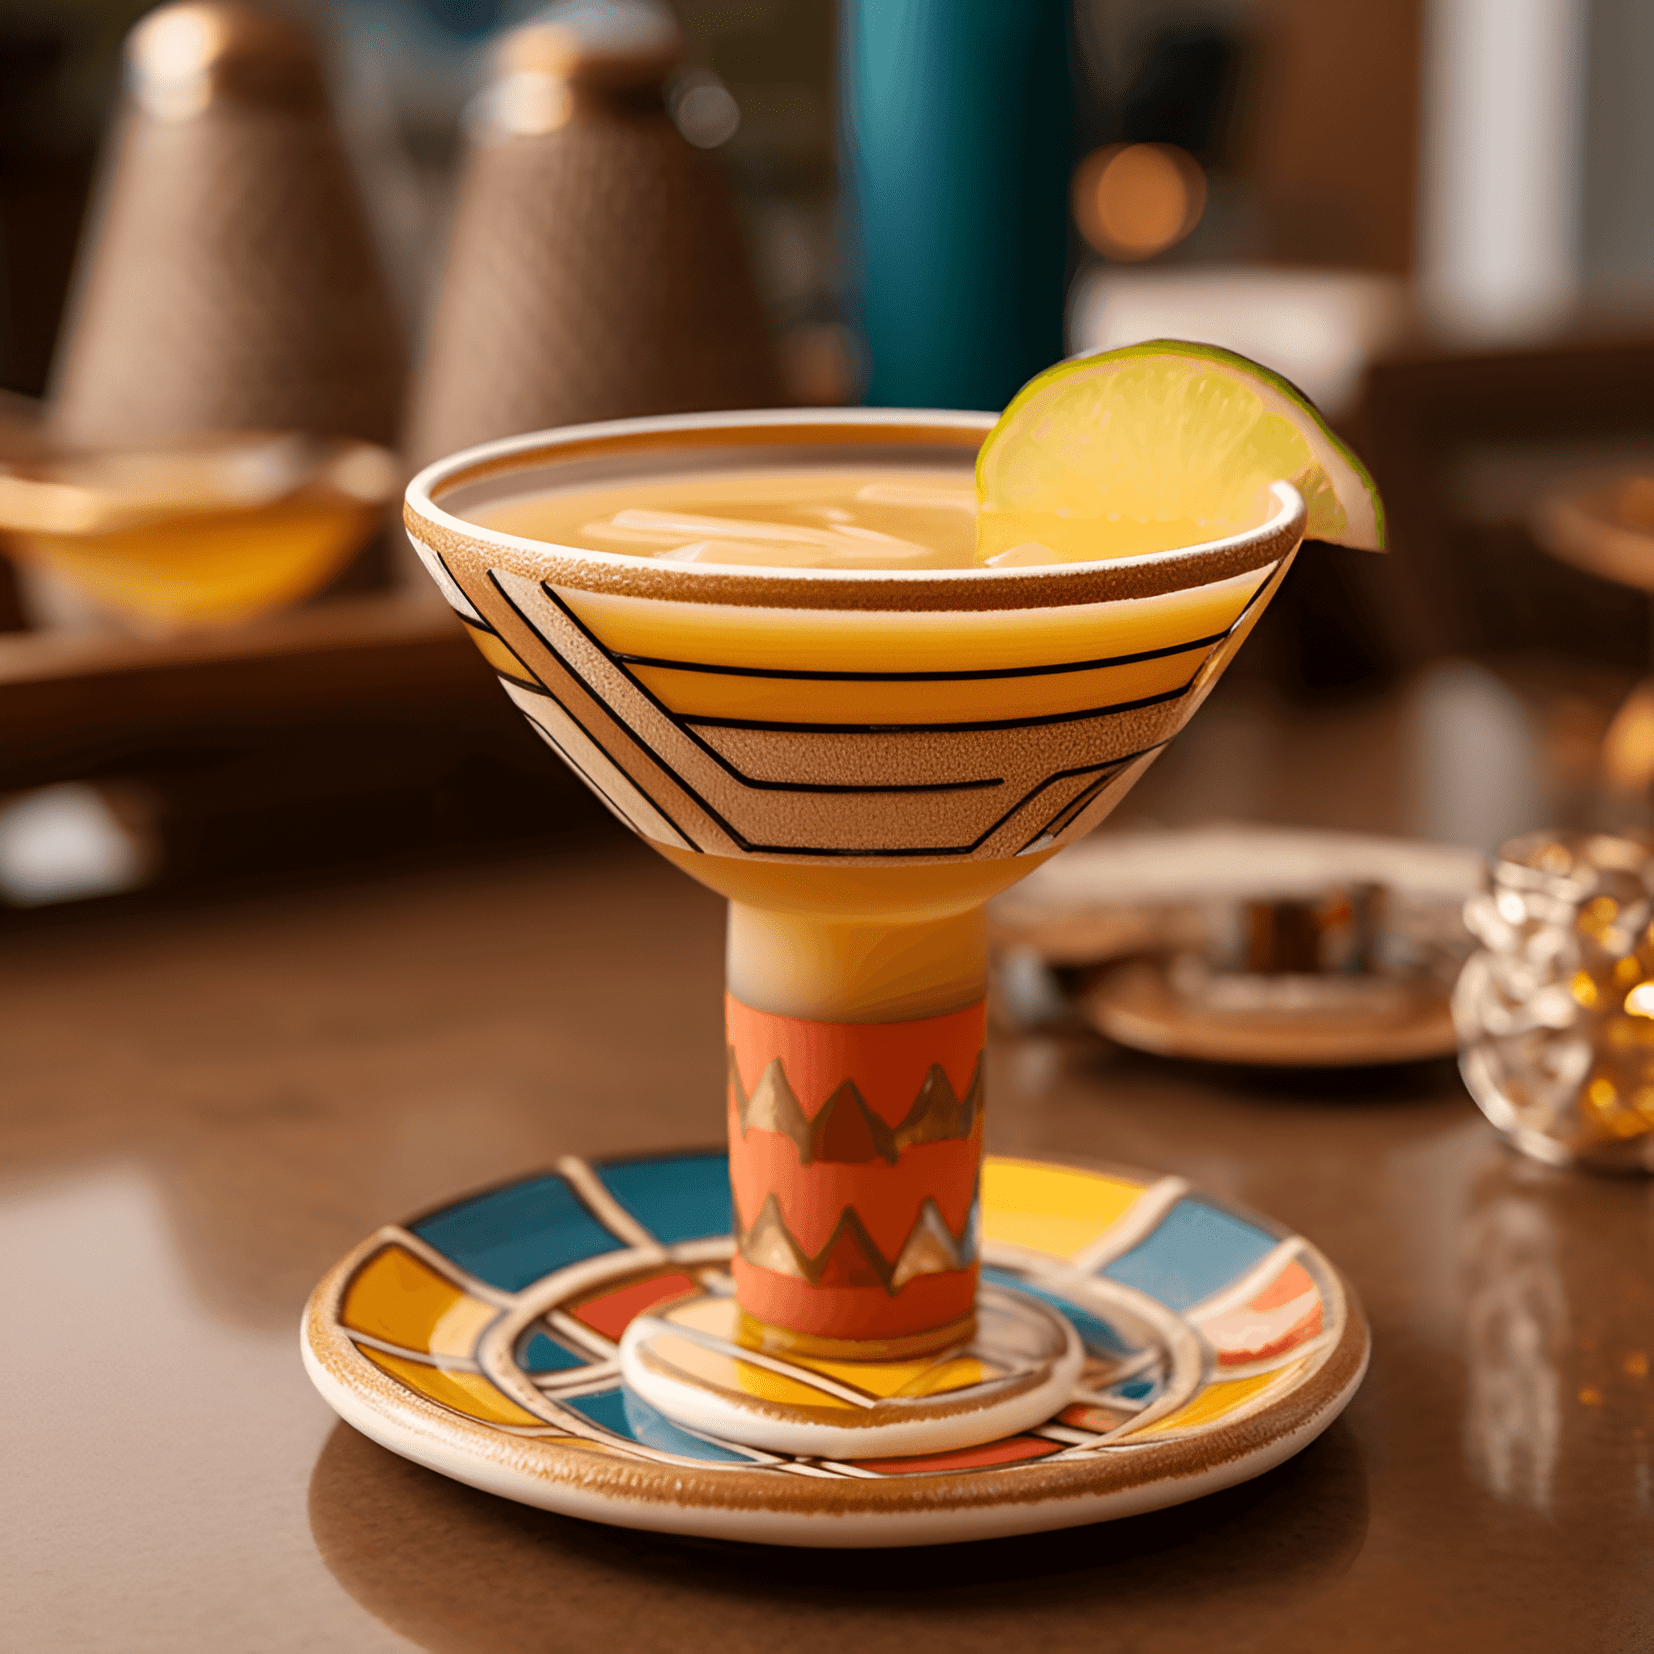 Inca Cocktail Recipe - The Inca cocktail has a complex and well-balanced taste, featuring sweet, sour, and slightly bitter notes. The fruity flavors from the passion fruit and pineapple are complemented by the warmth of the pisco and the herbal touch of the bitters.